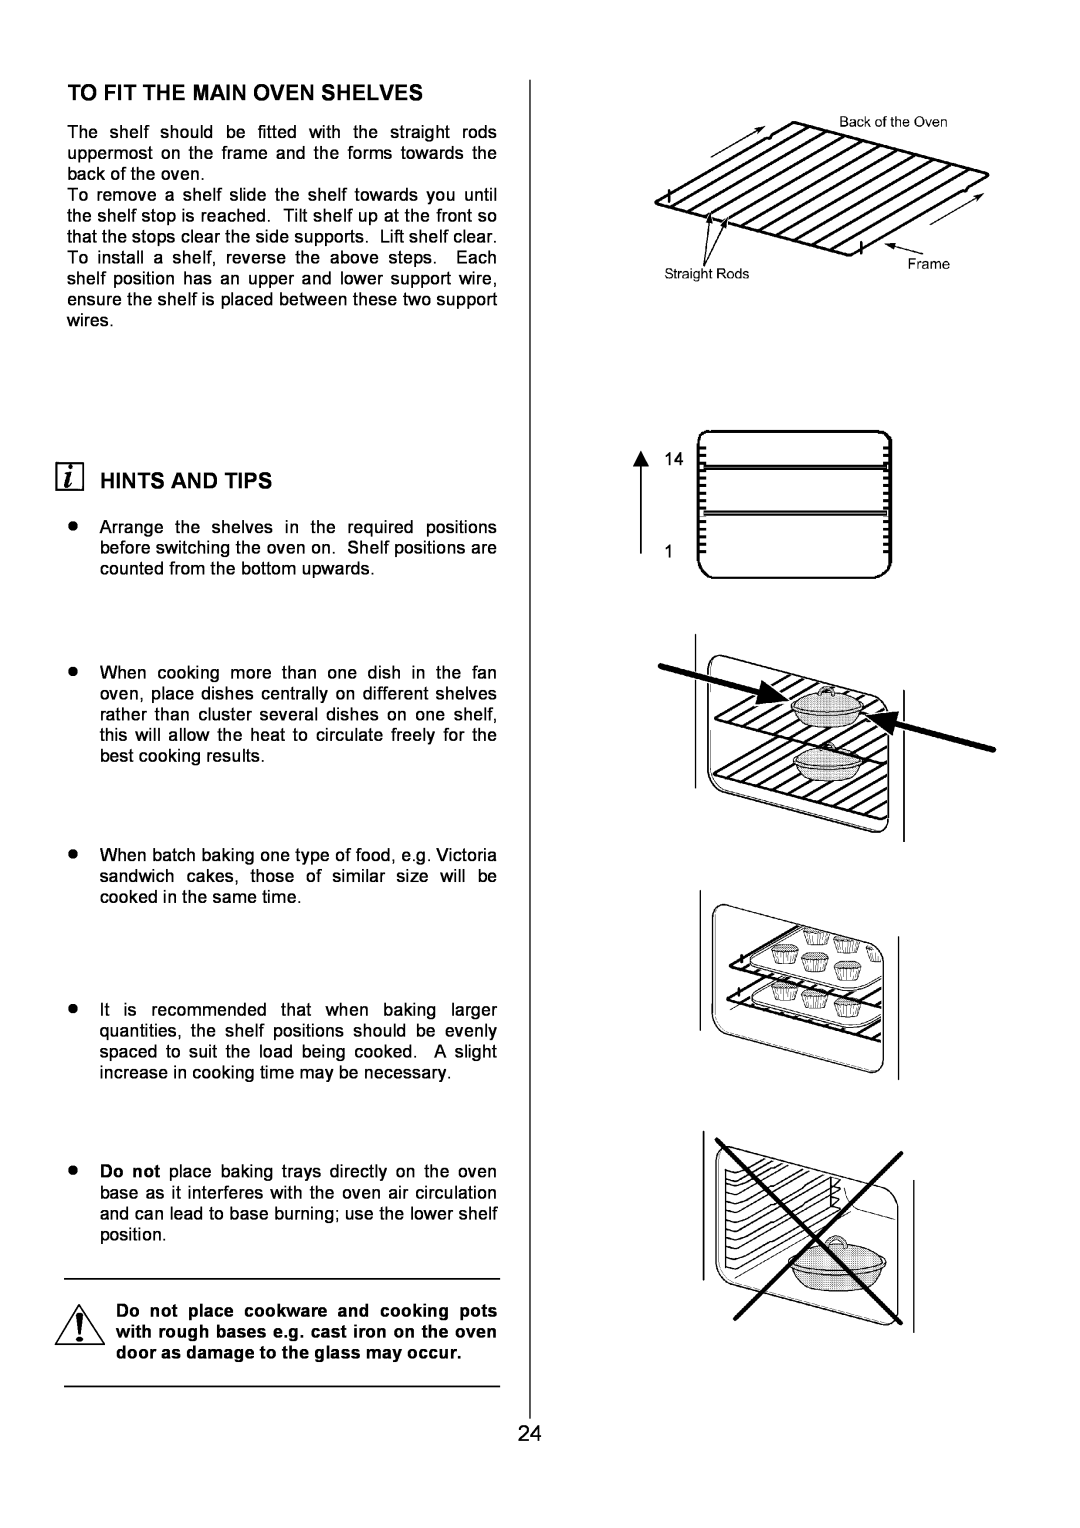 AEG U7101-4, 311704300 manual To Fit The Main Oven Shelves, Hints And Tips 